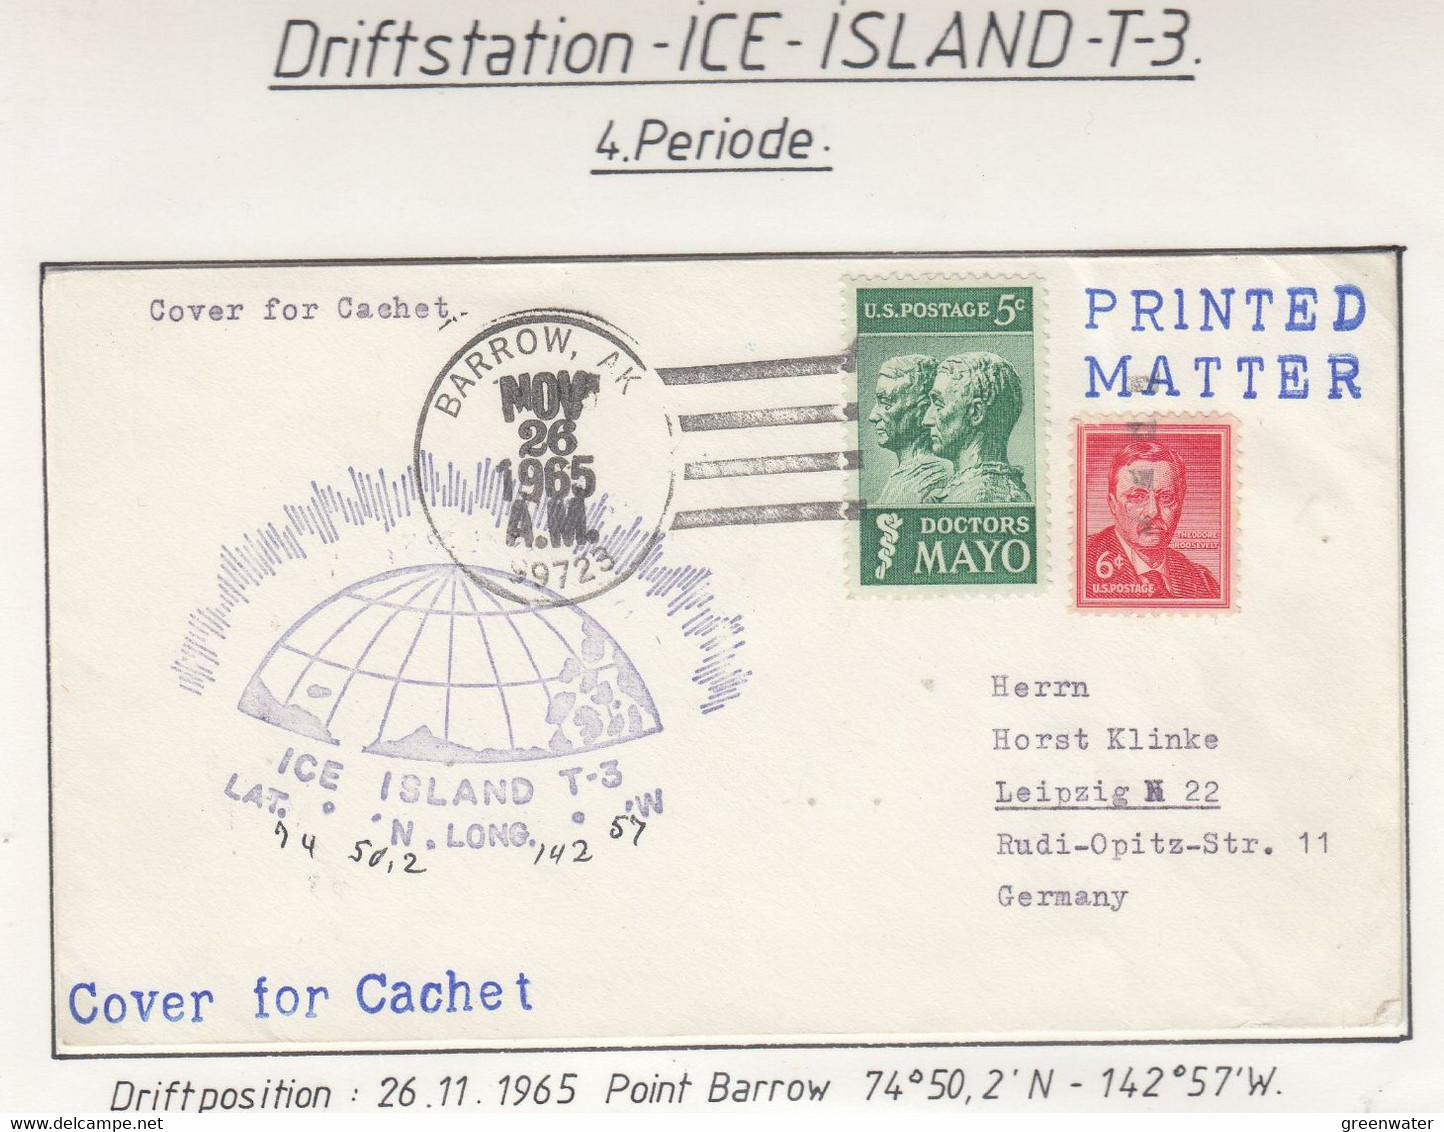 USA Driftstation ICE-ISLAND T-3 Cover Ice Island T3-Periode 4 Ca NOV 261965  (DR117B) - Stations Scientifiques & Stations Dérivantes Arctiques